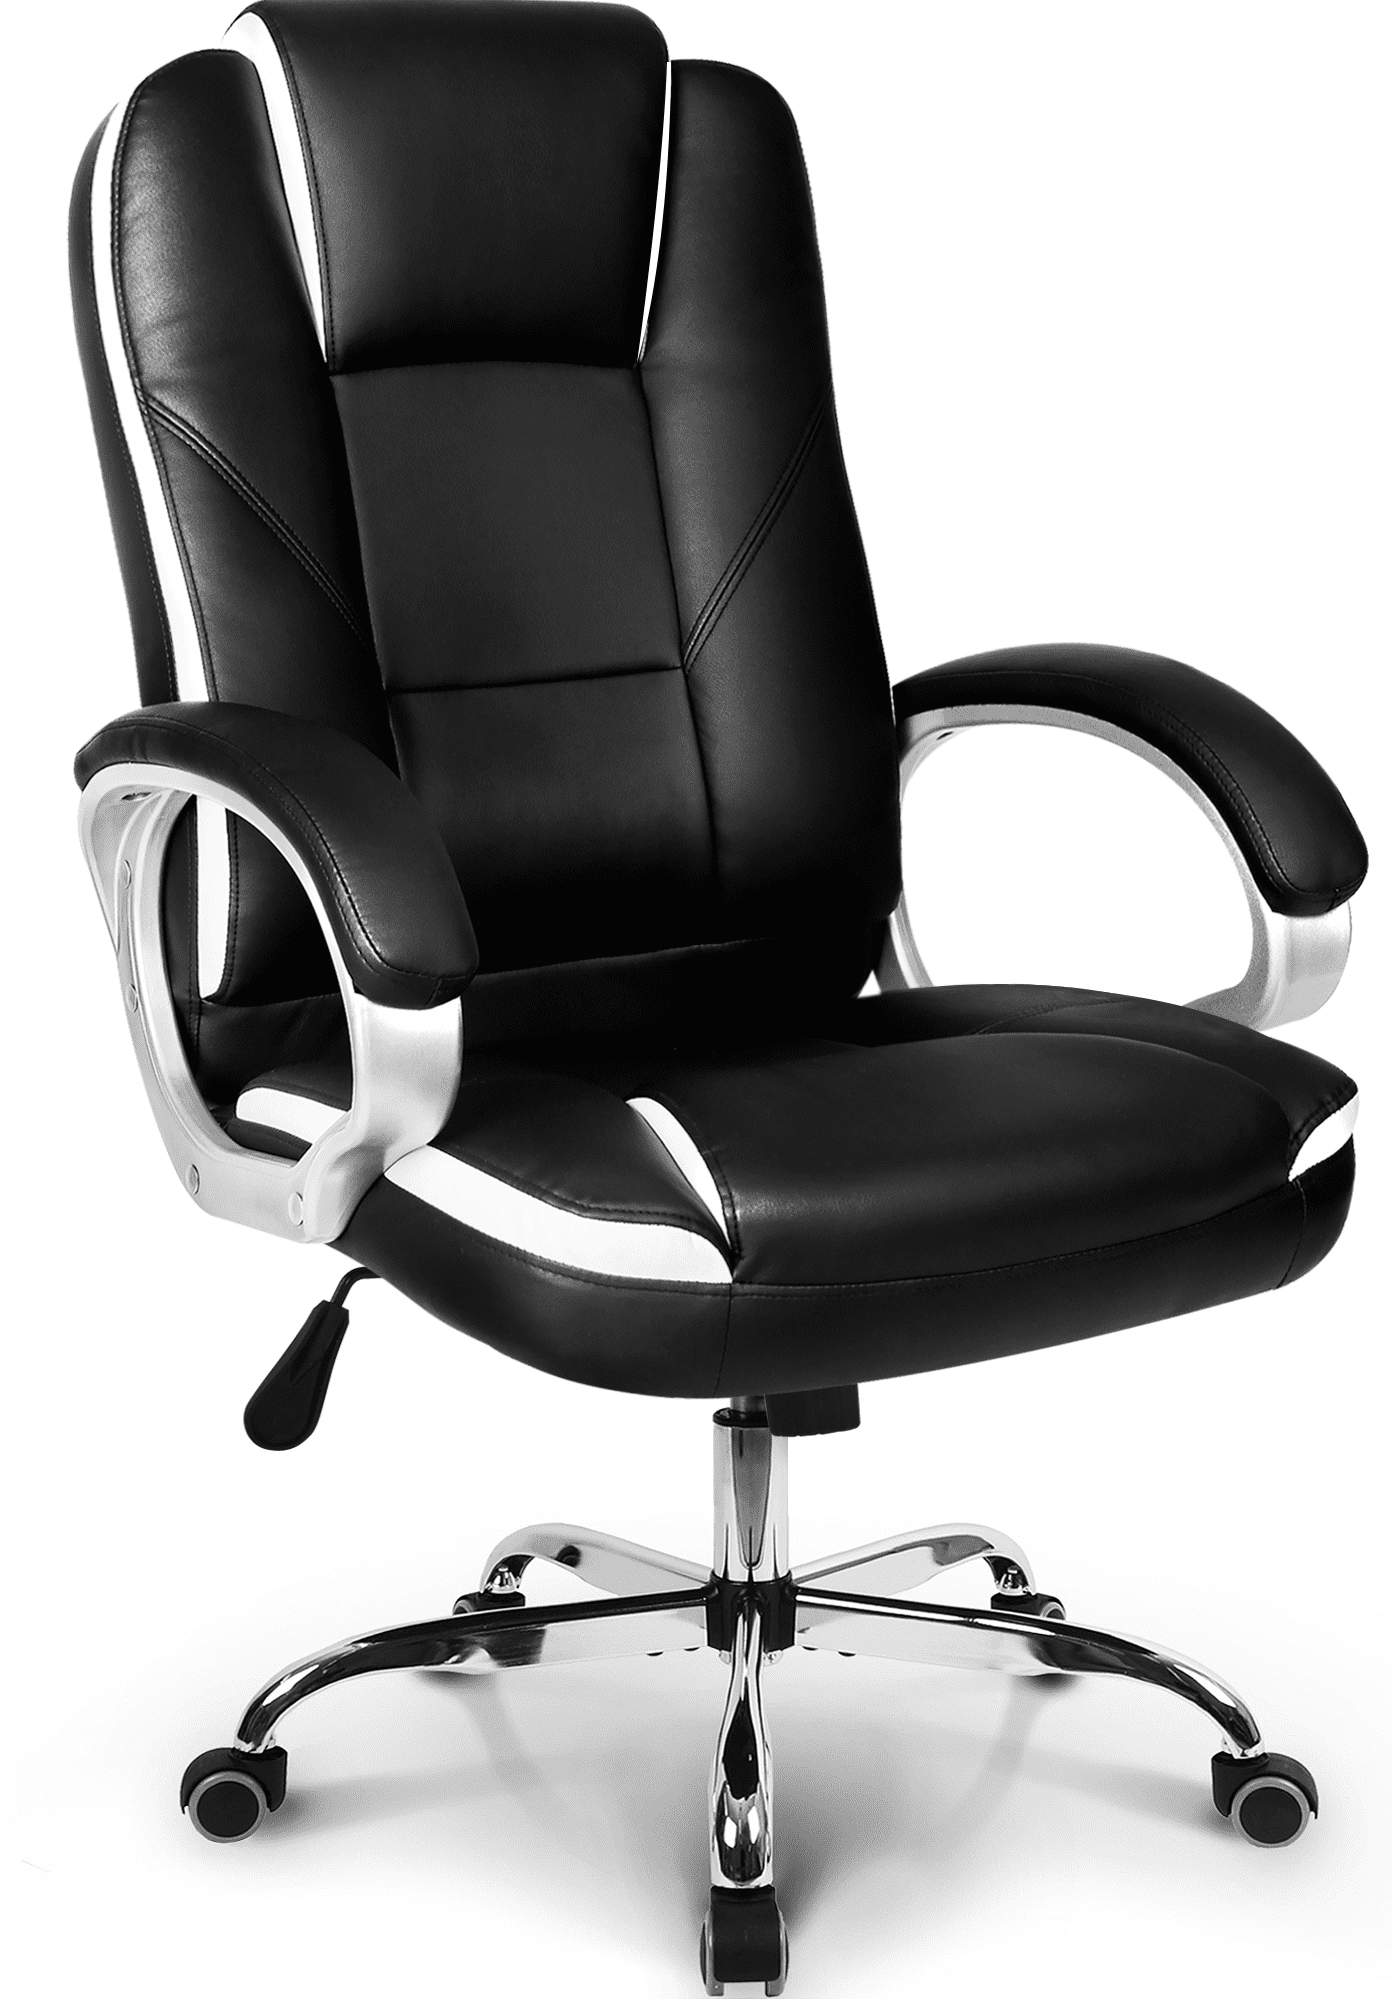 ERGONOMIC HIGH BACK LEATHER MANAGERS DESK OFFICE CHAIR 